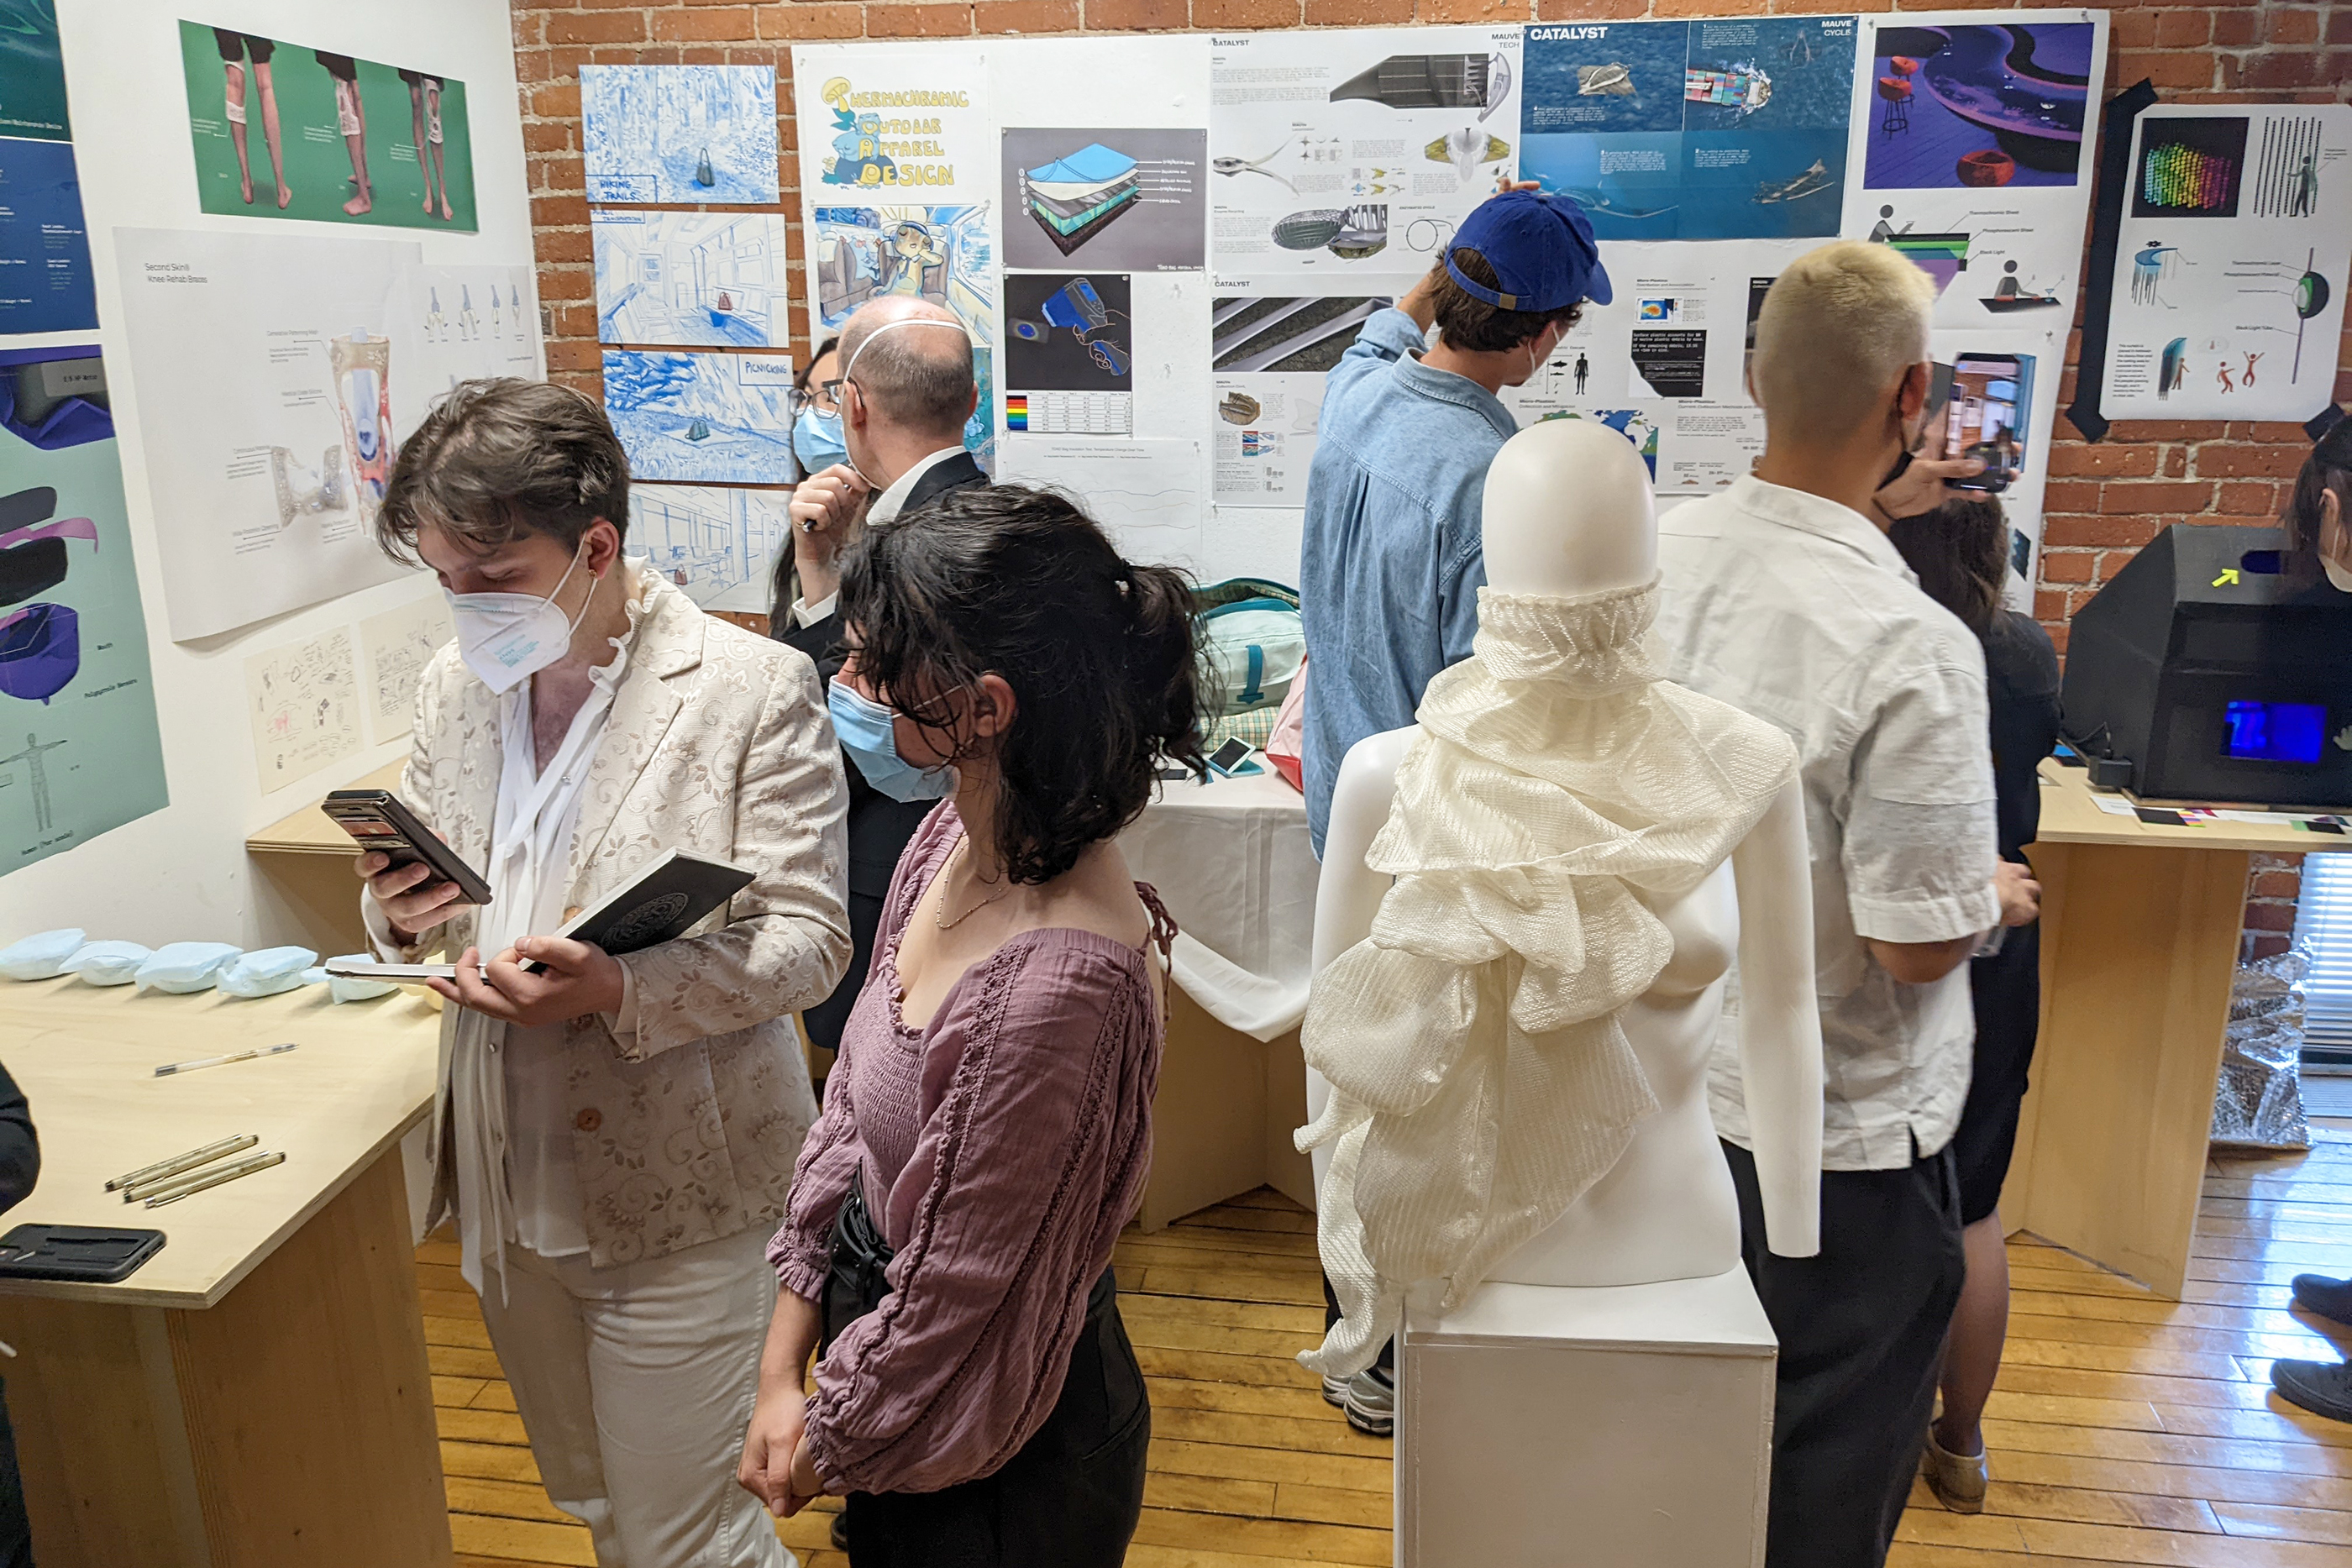 students and critics crowd into ID exhibition space